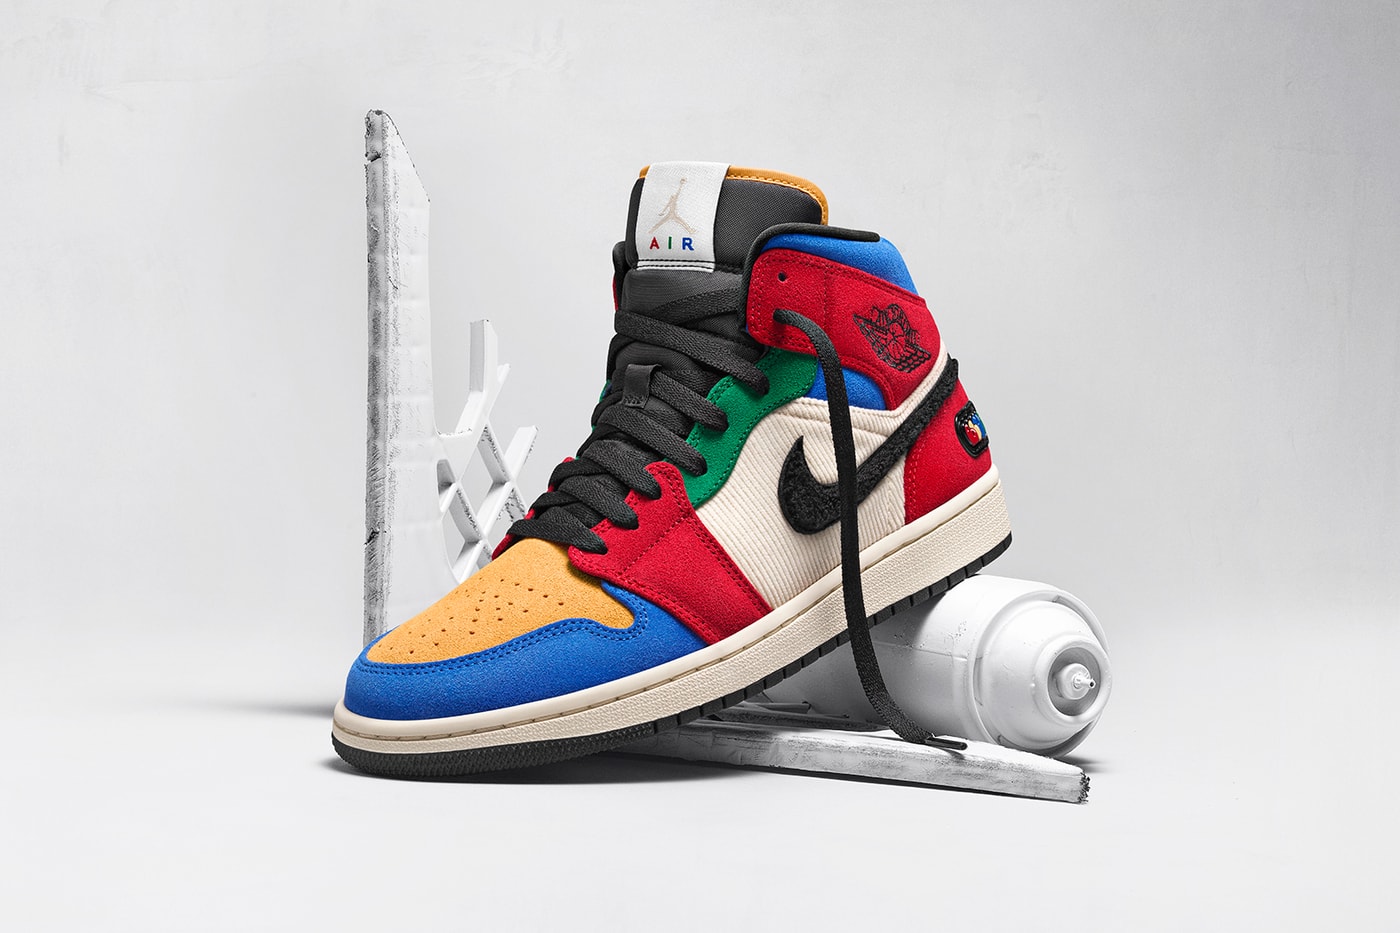 nike air jordan 1 collaborations fearless ones collection melody ehsani sneakers footwear shoes sneakerhead